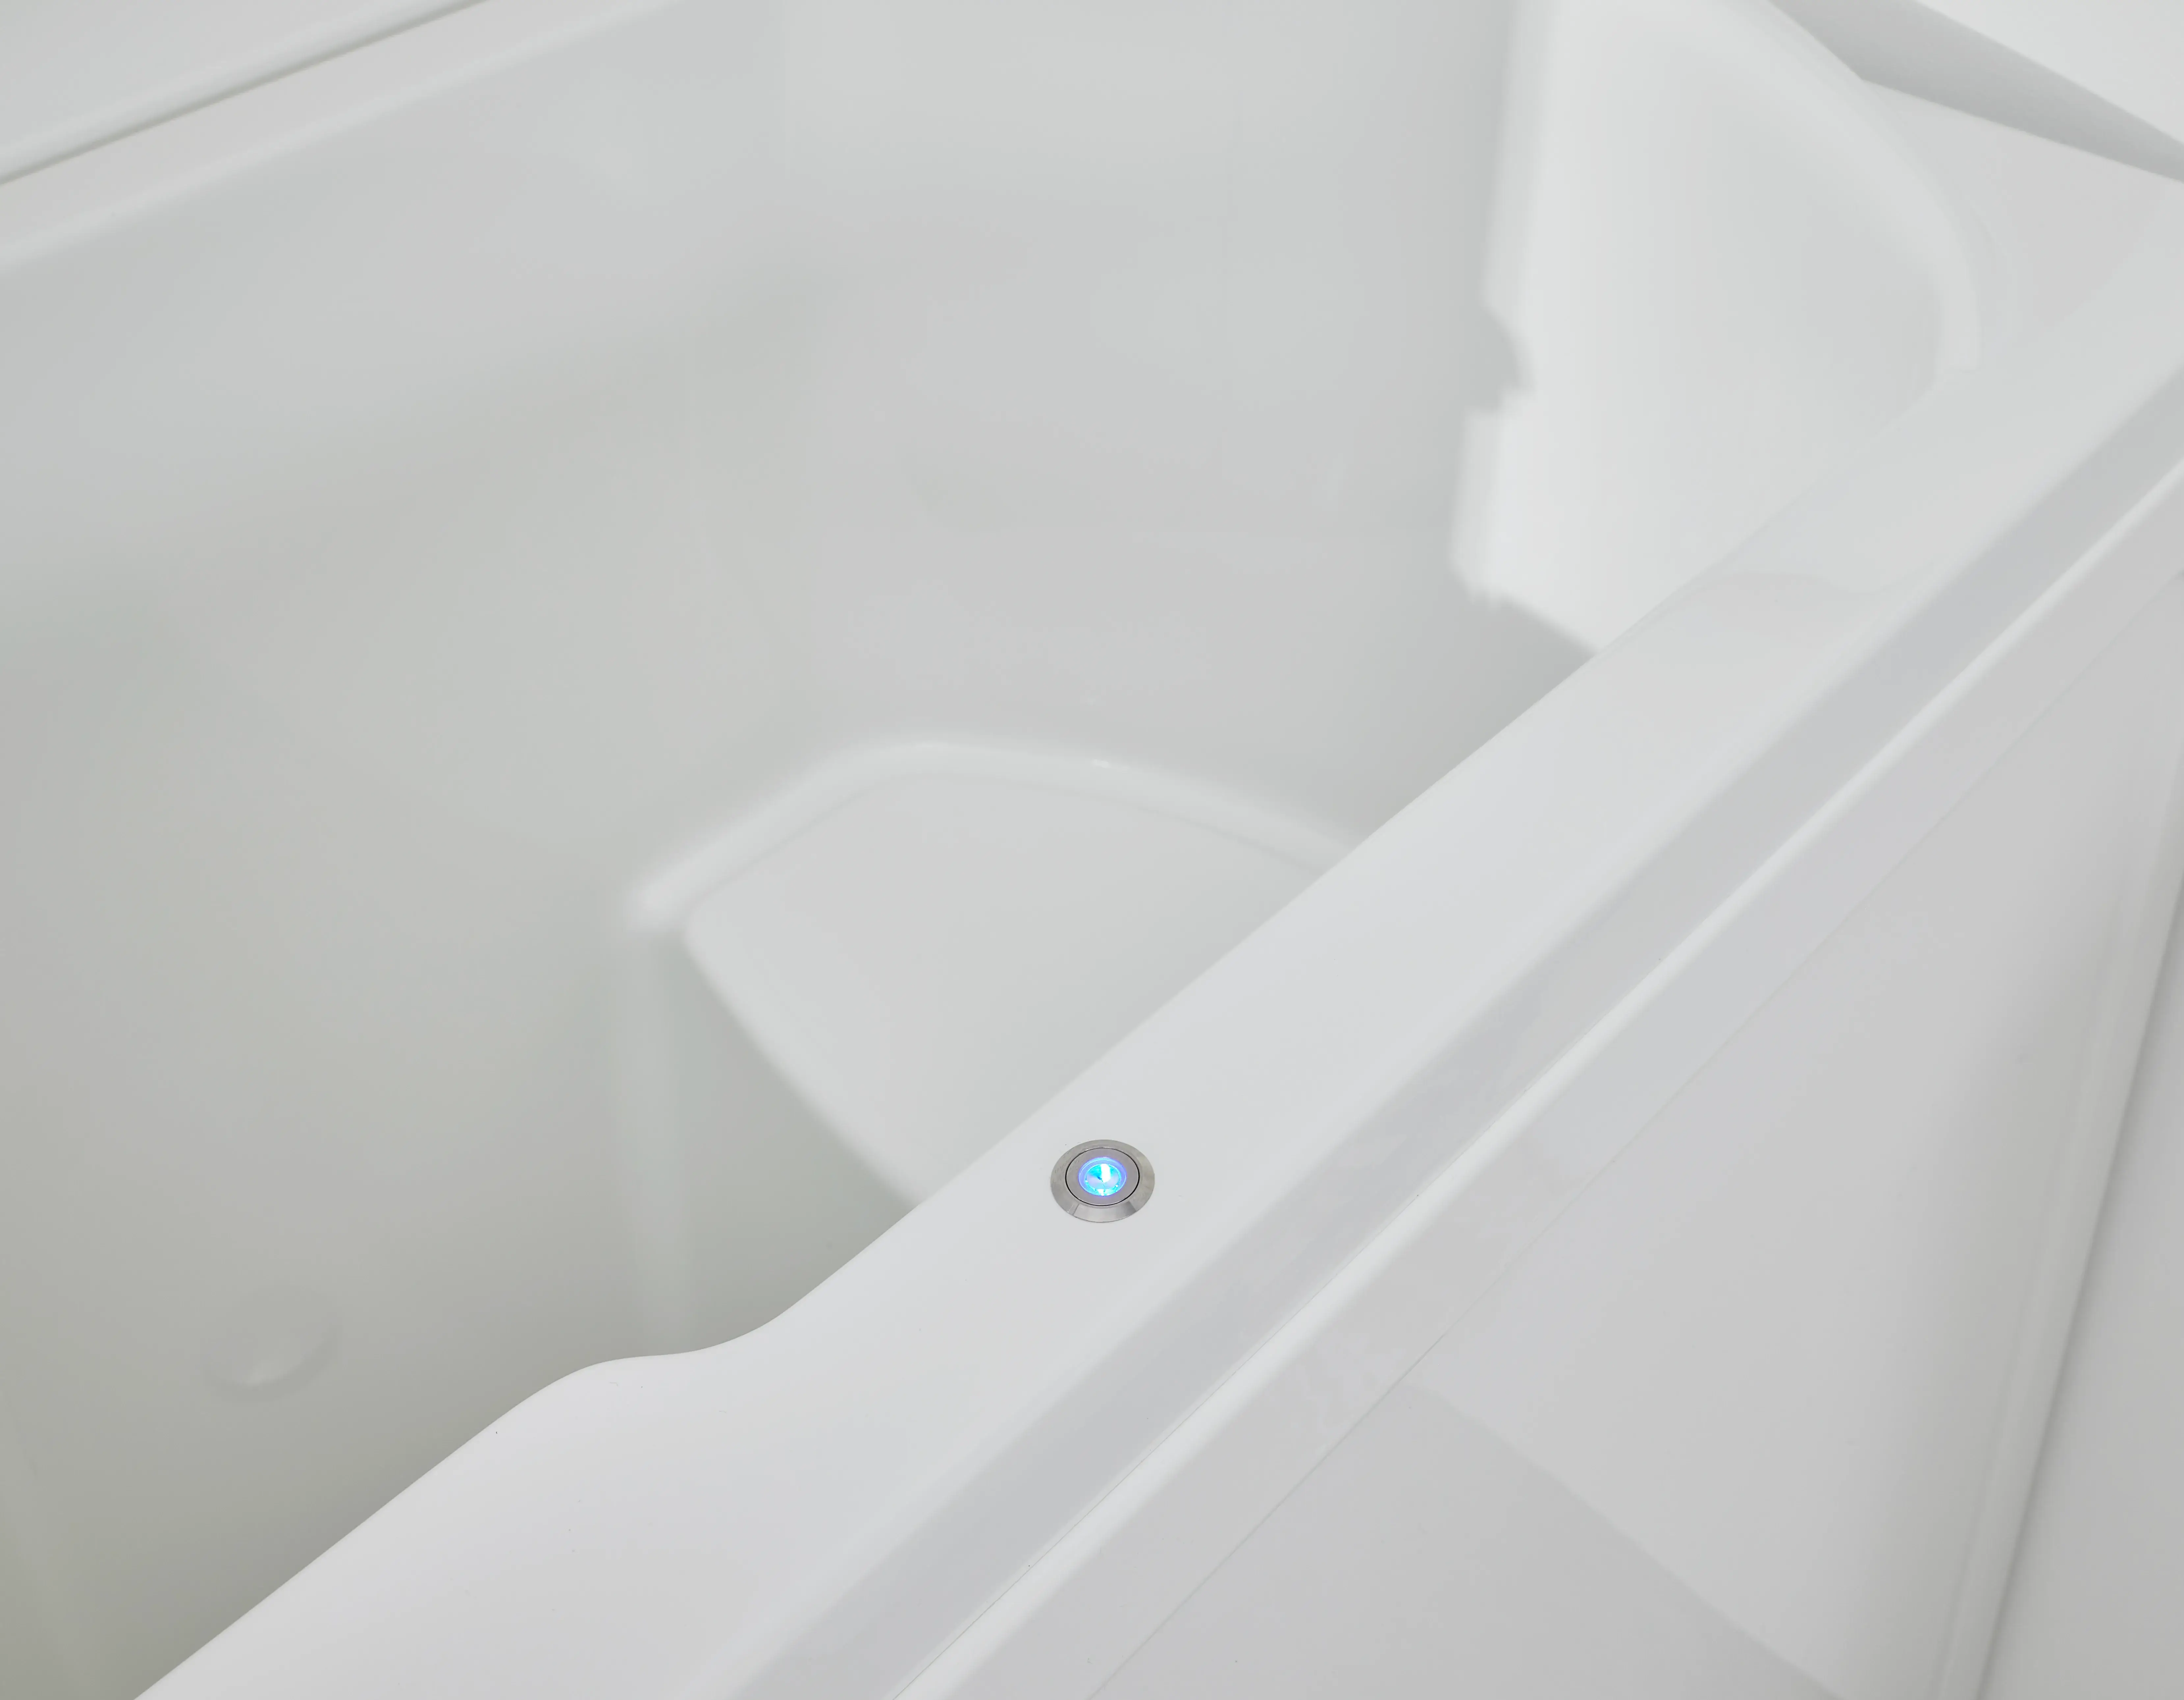 A white bathtub with a blue light on the side of it.